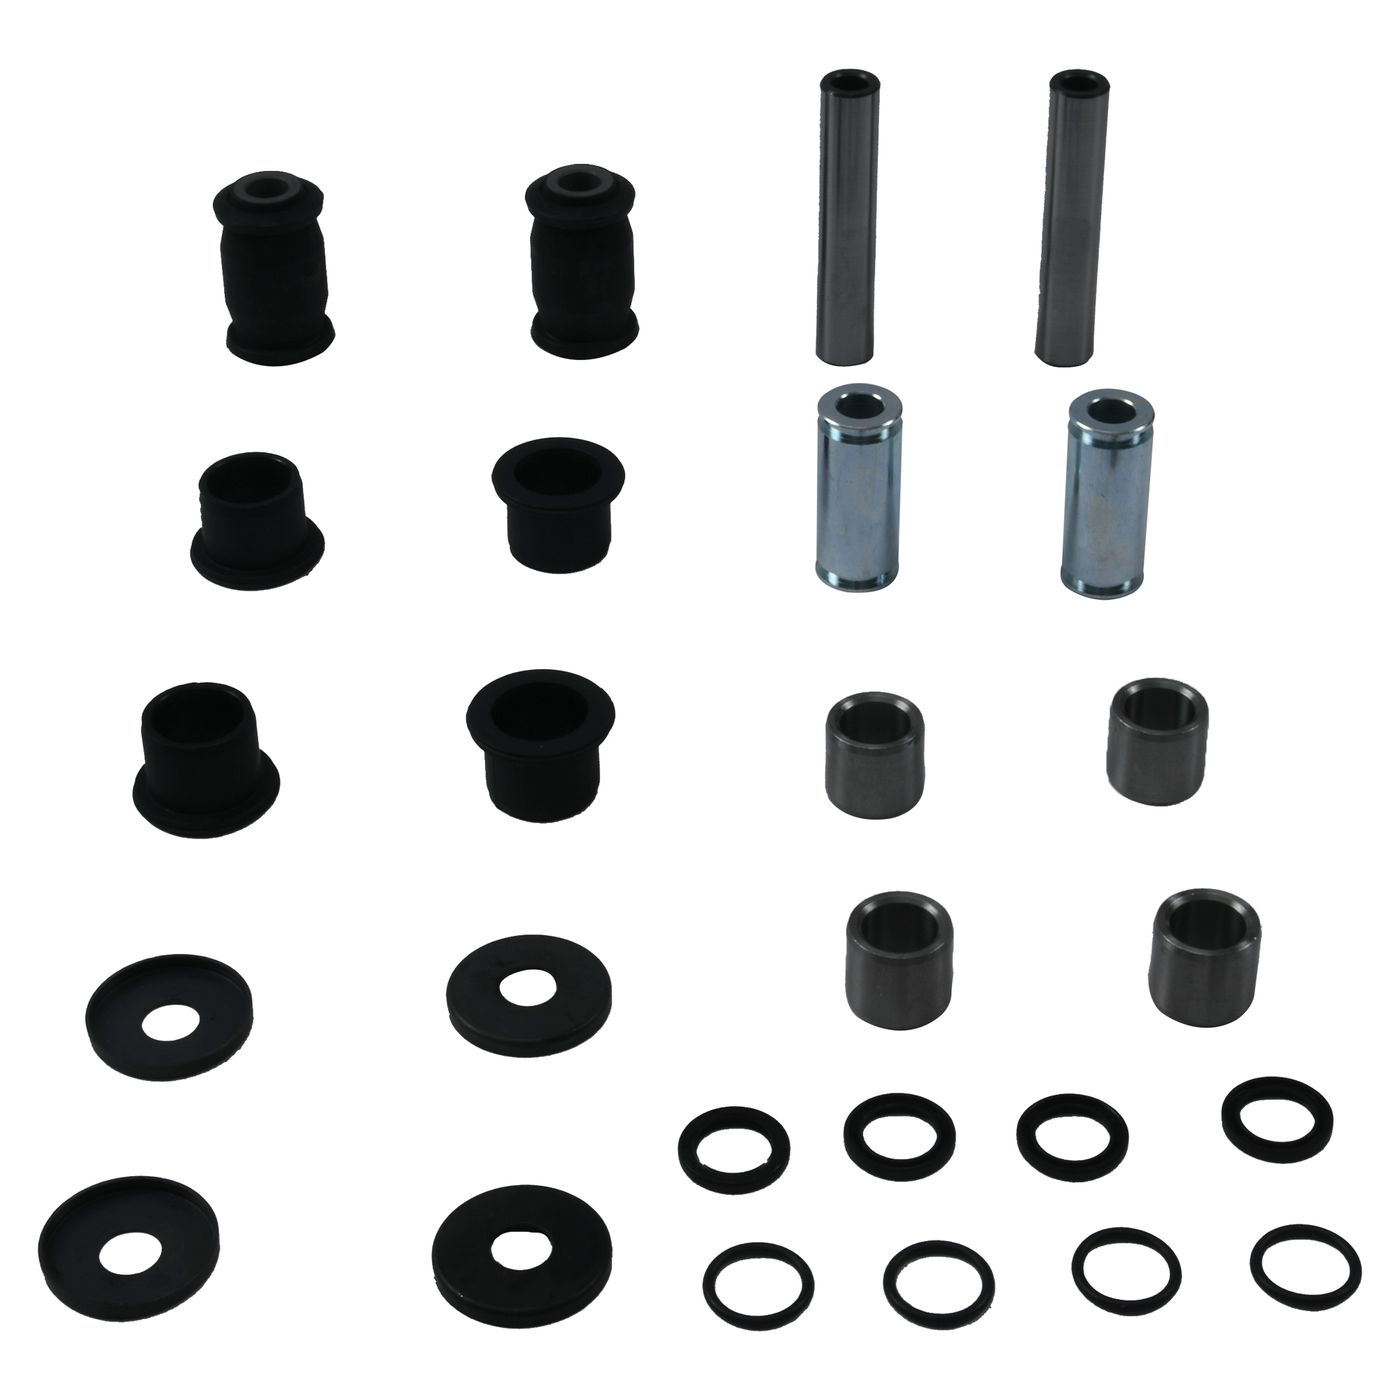 Wrp Rear Ind. Suspension Kits - WRP501227 image